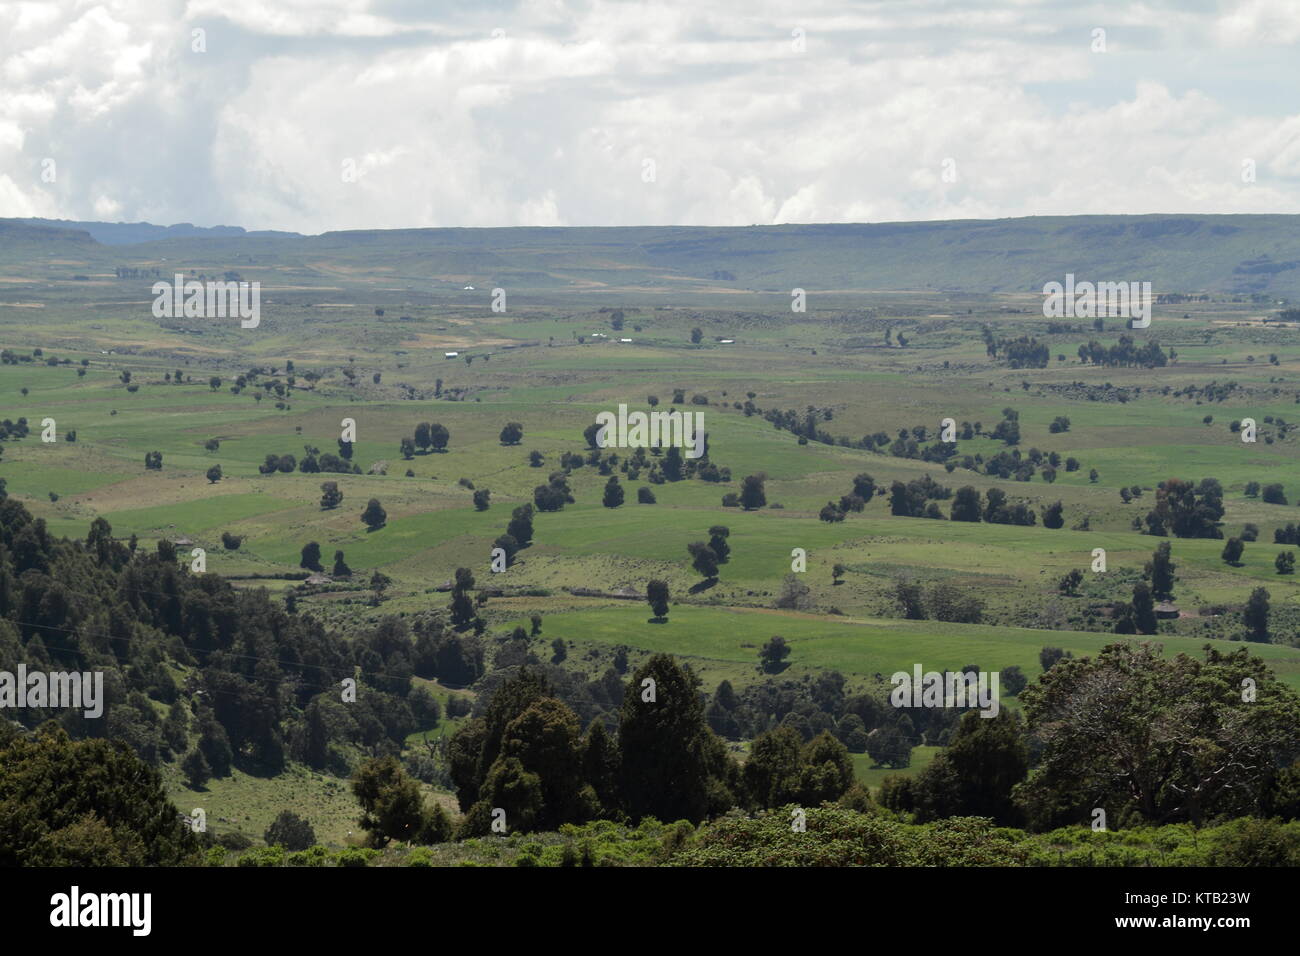 the landscape of the bale mountain national park in ethiopia Stock Photo